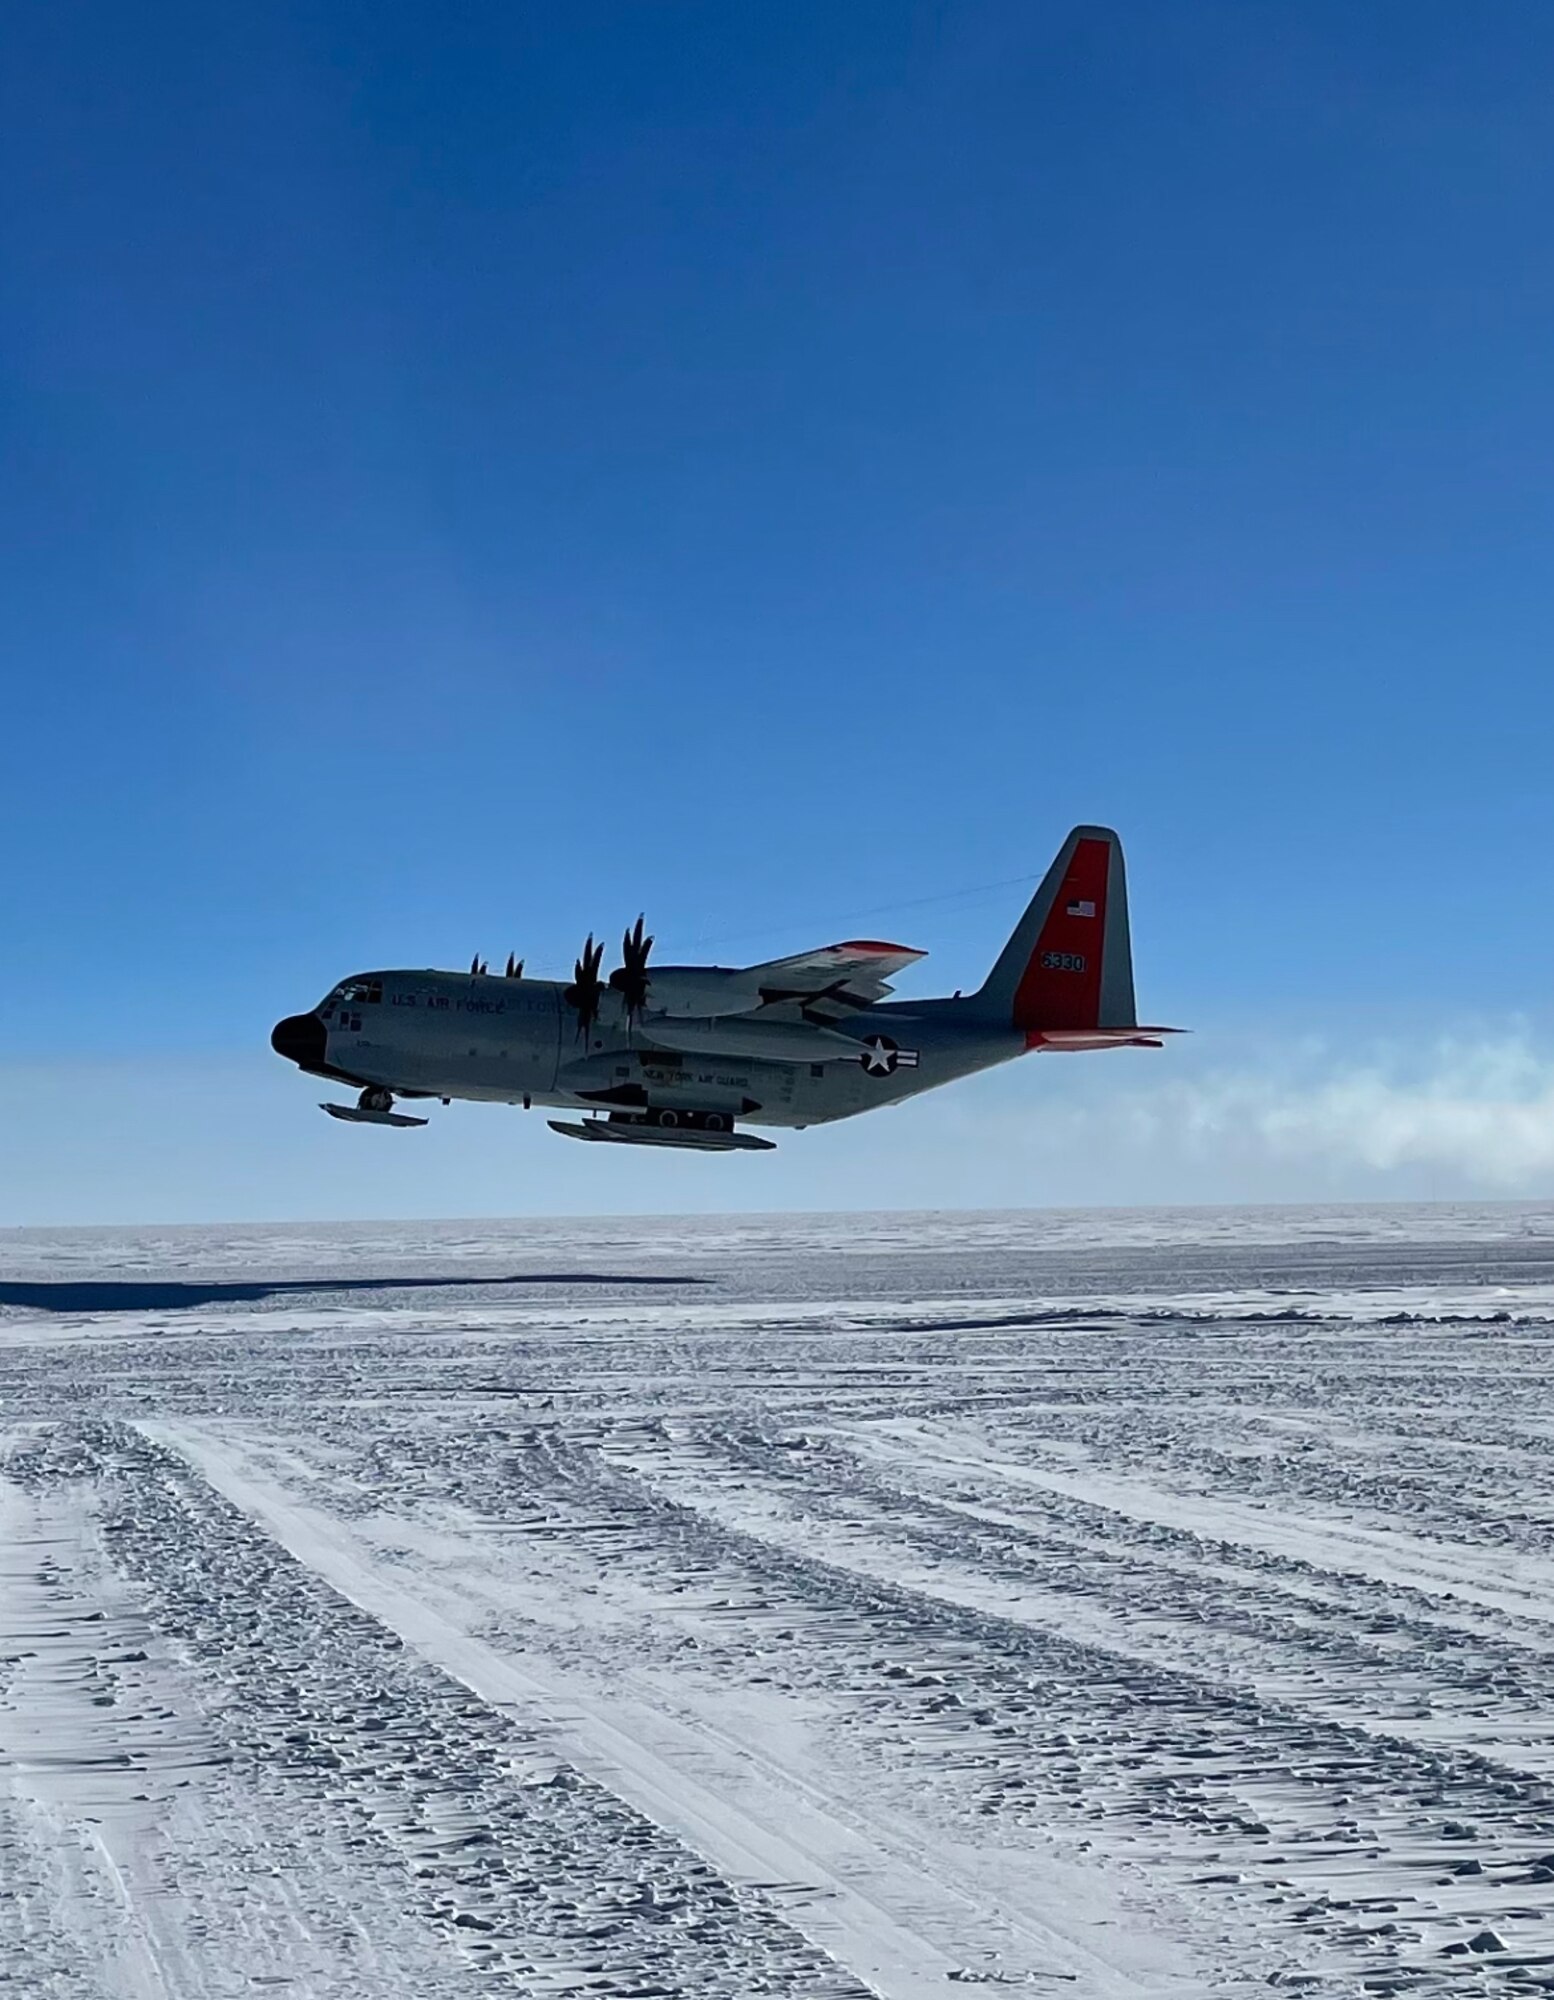 A LC-130 Skibird takes off from Amundson-Scott South Pole Station after being repaired on the open skiway. A maintenance team of National Guard Airmen from New York, Kentucky and Pennsylvania flew in to repair the aircraft.